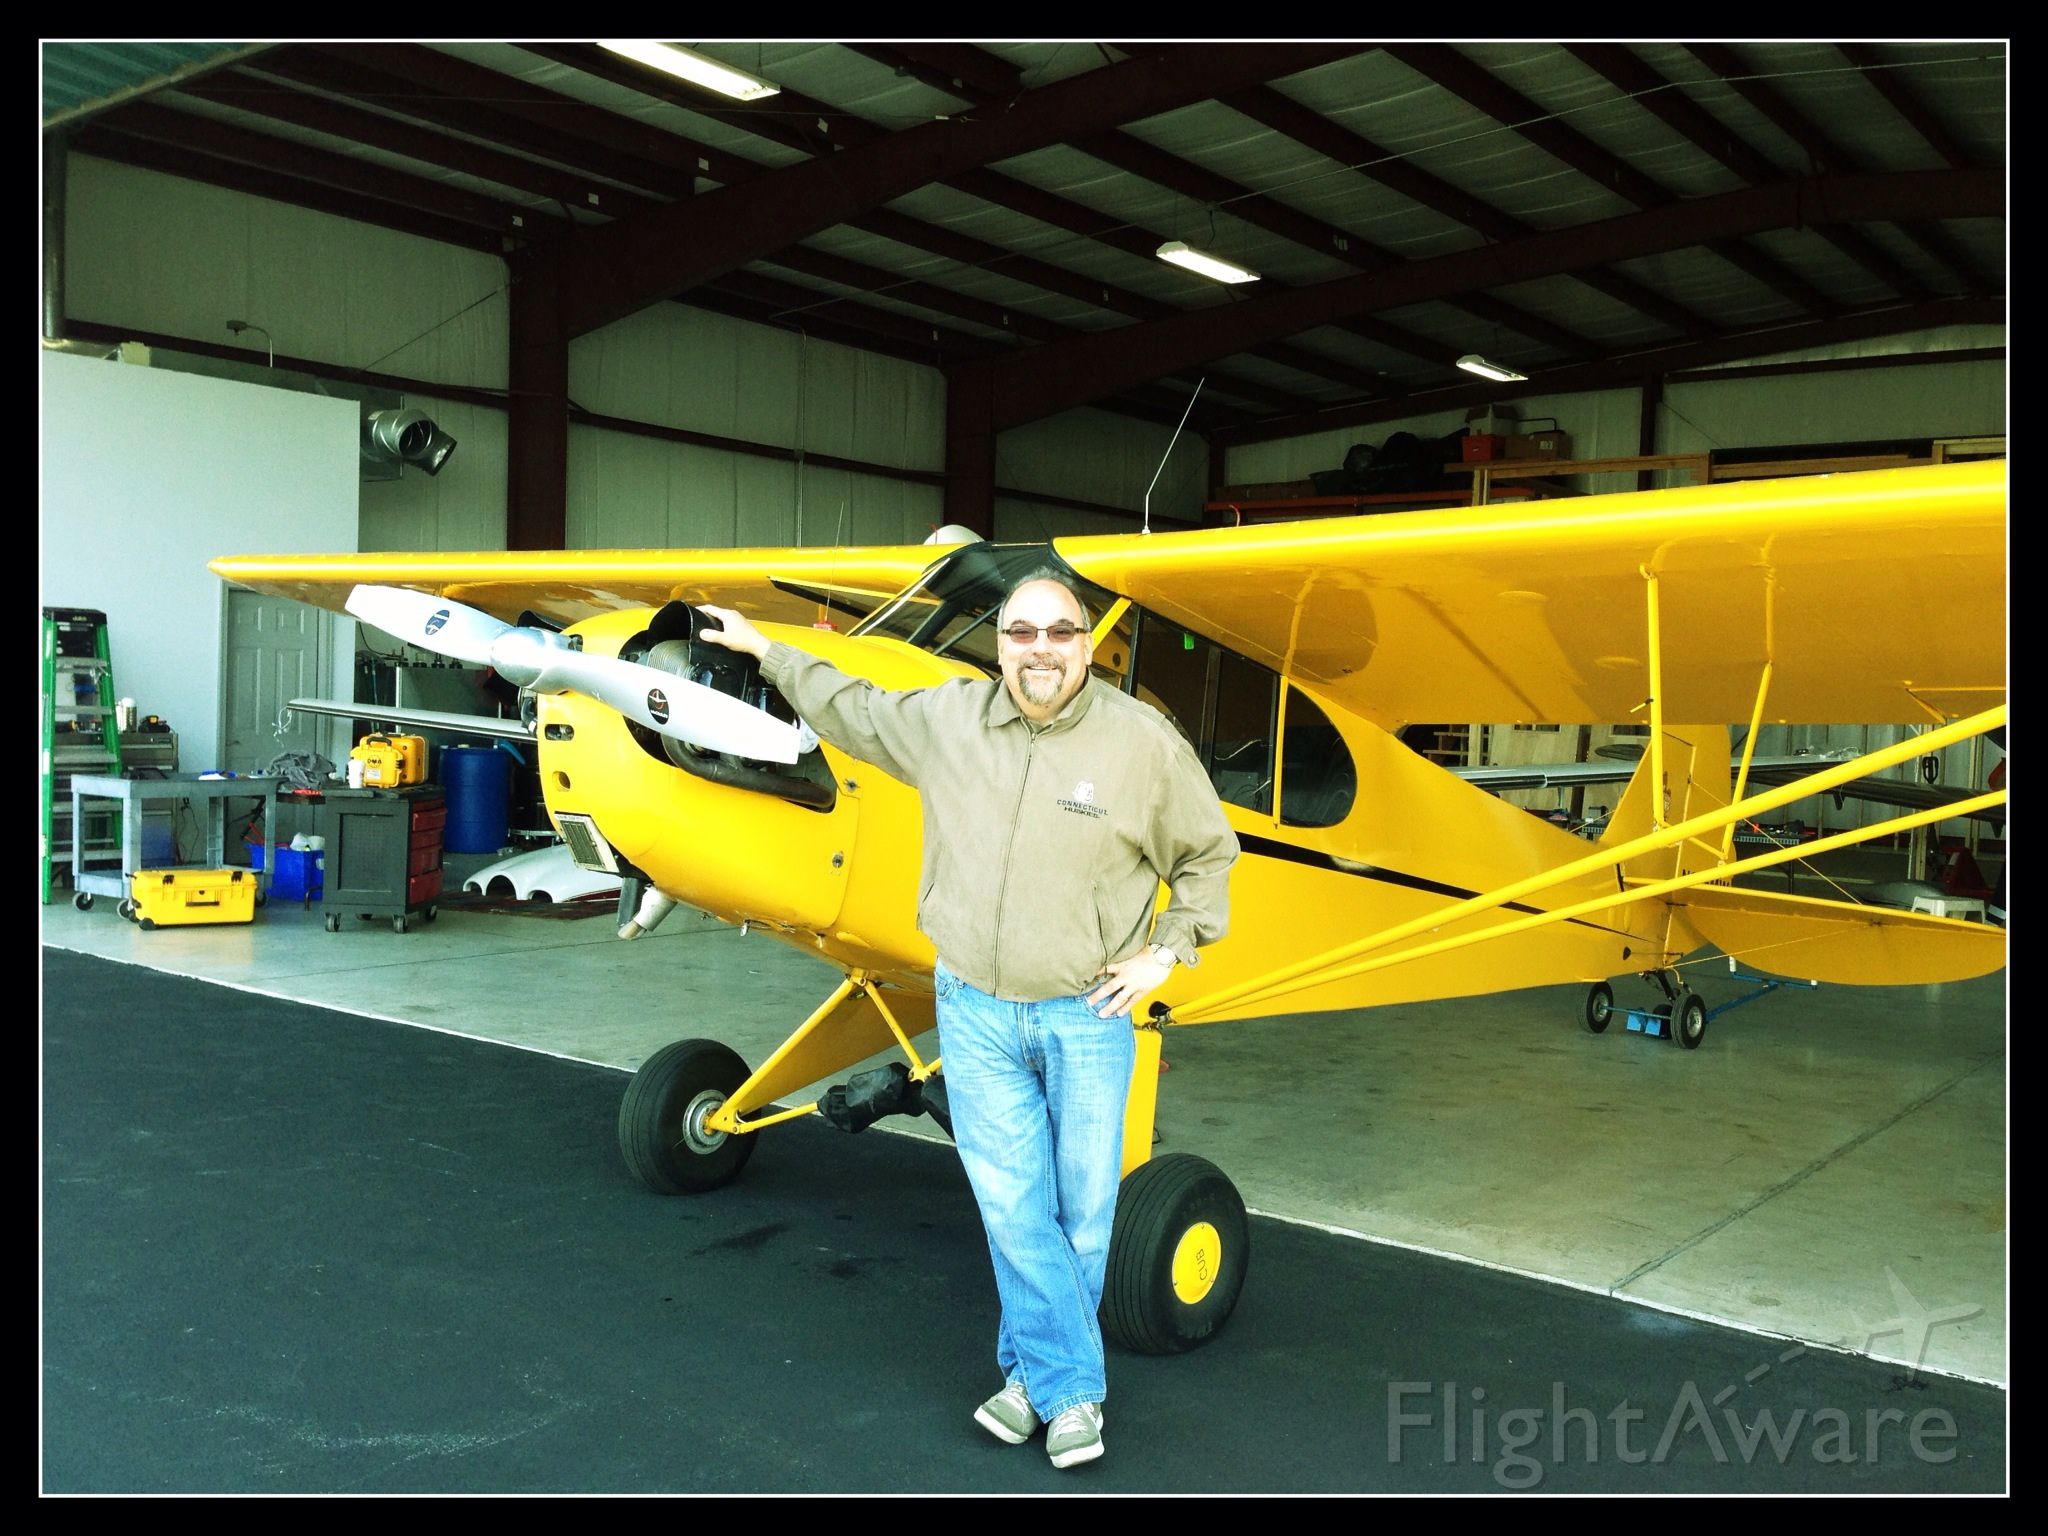 Piper NE Cub (N33MW) - Day of our purchase - Mansfield, MA airport.